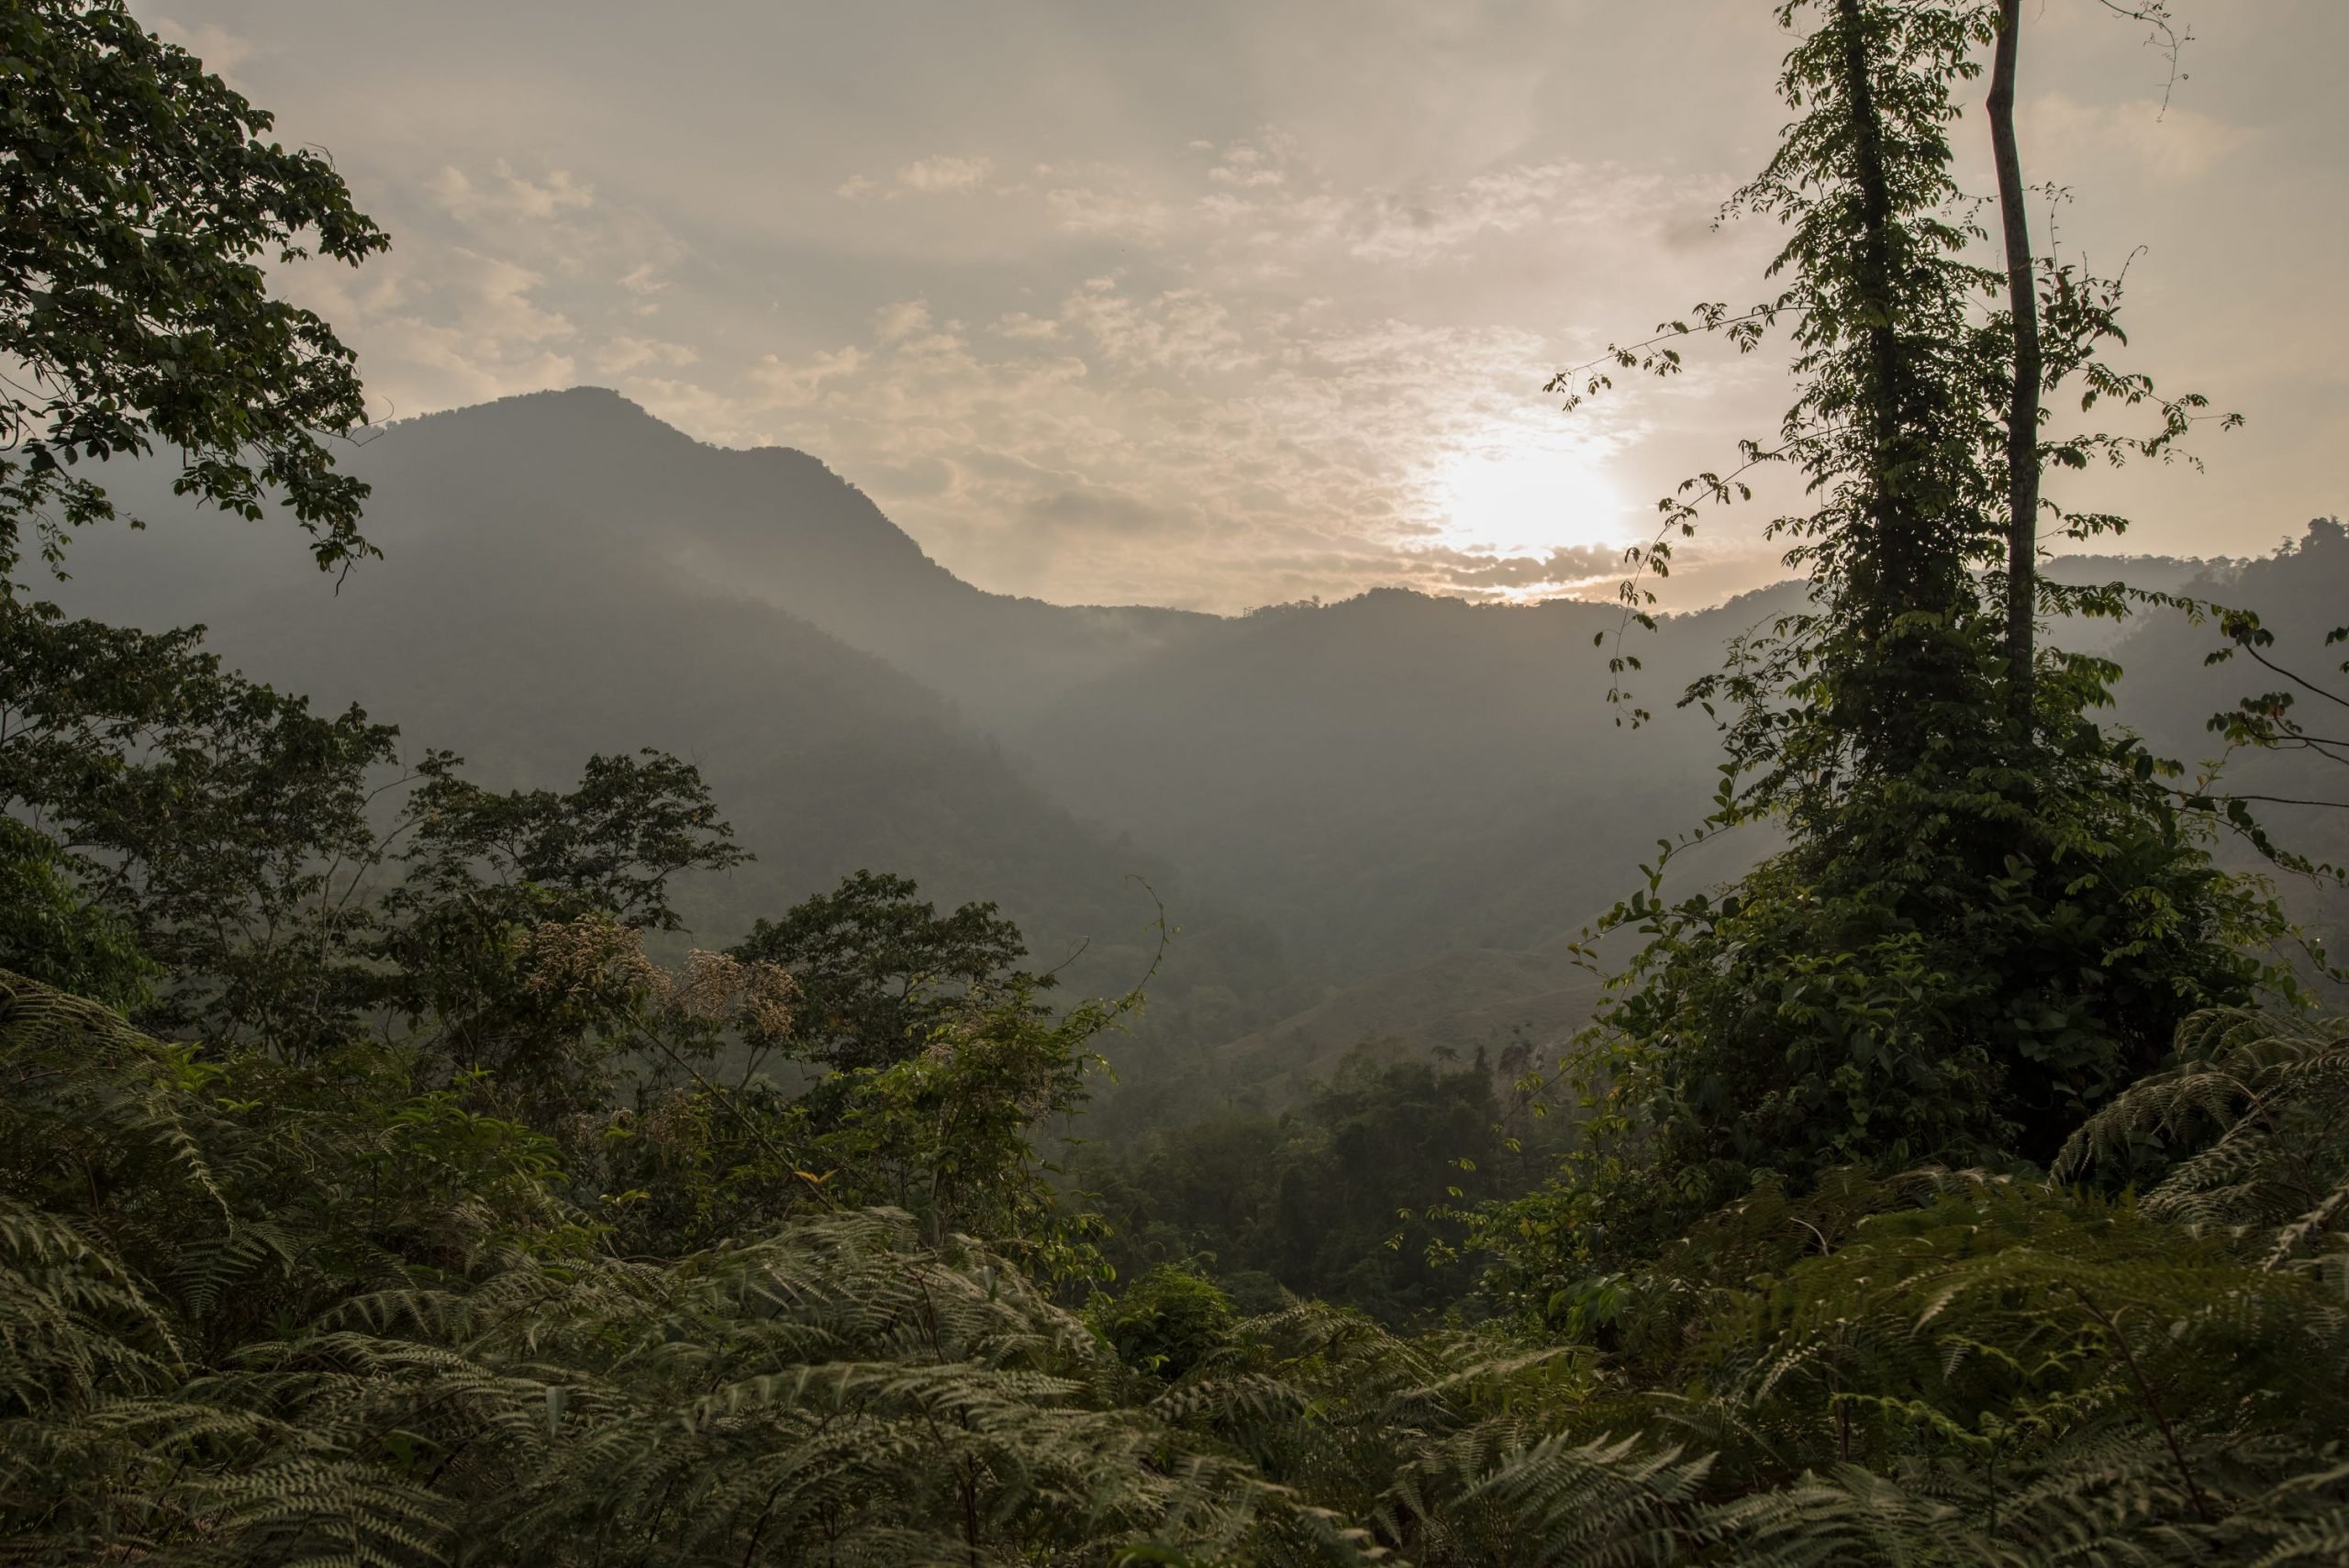 A view of mountains and rainforest while on the Ciudad Perdida trail in Colombia.